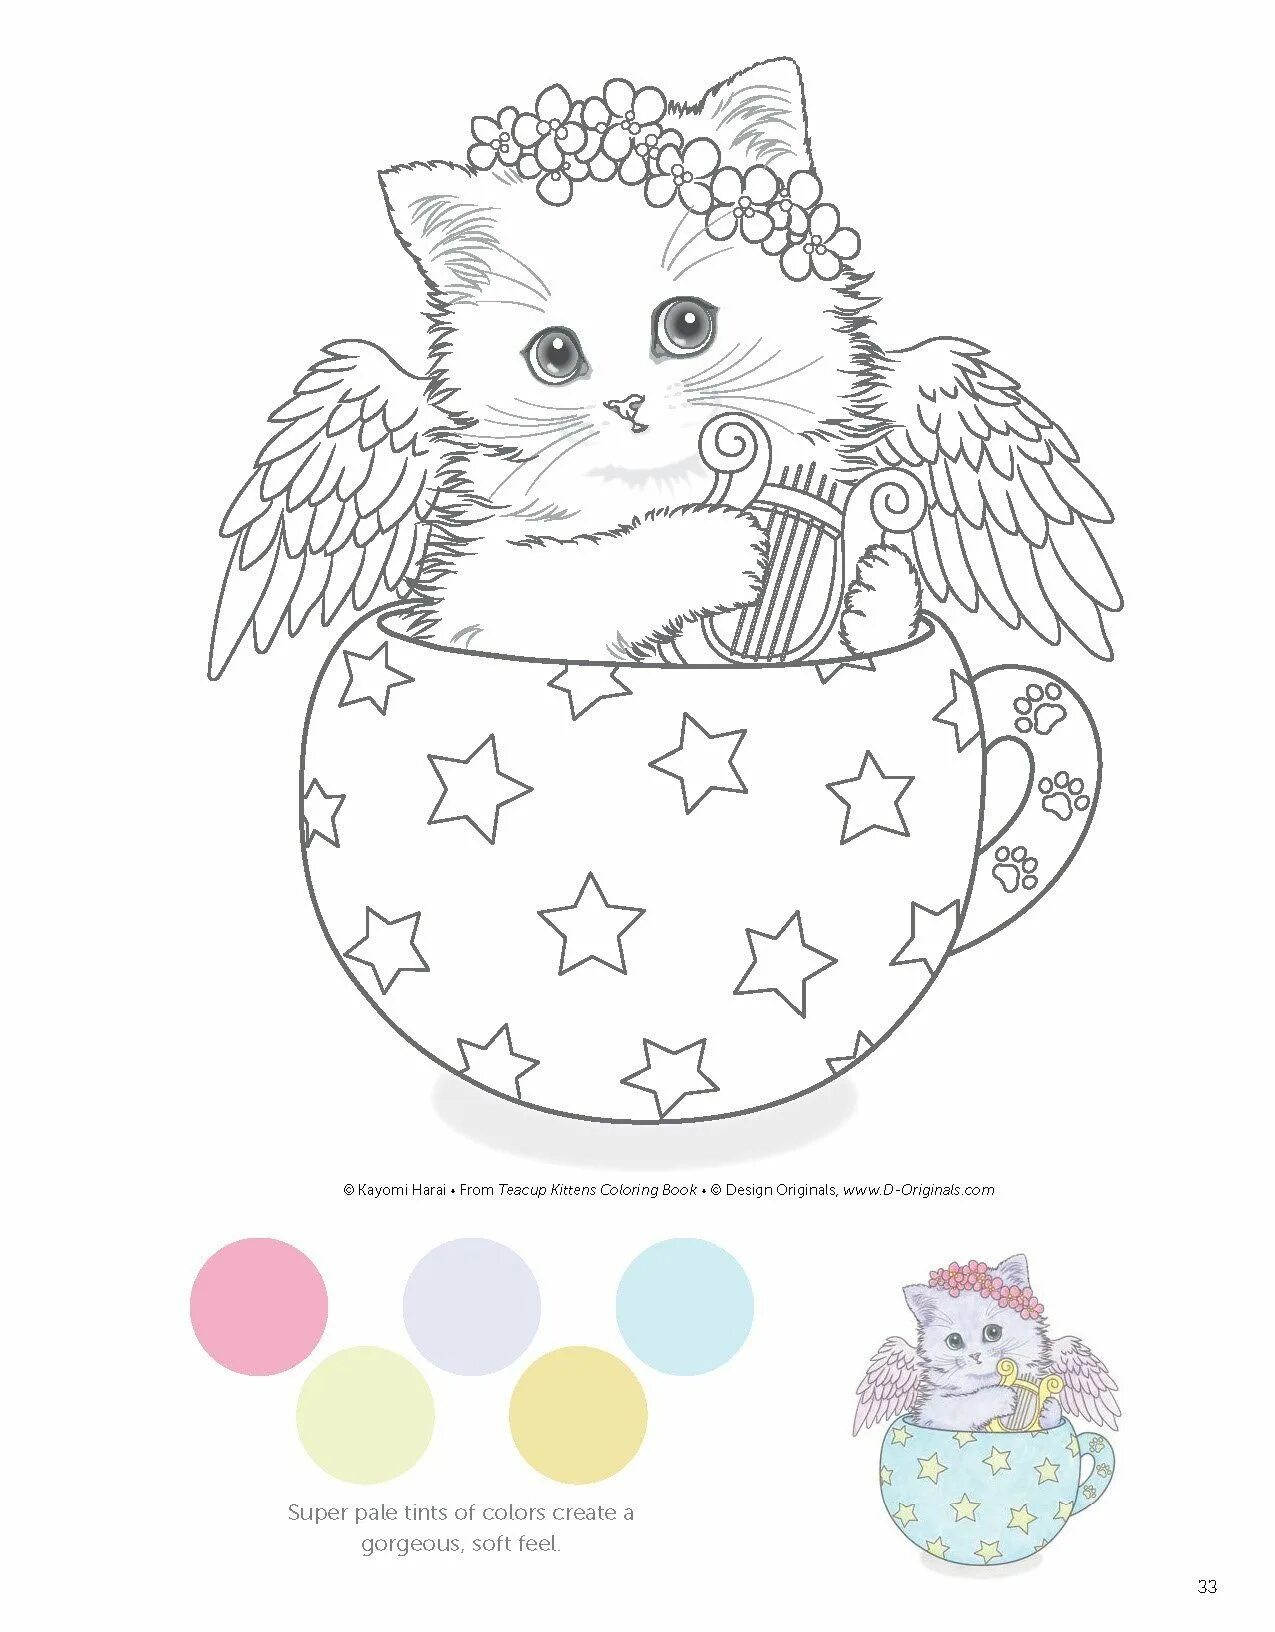 Weird cat in a hat coloring book